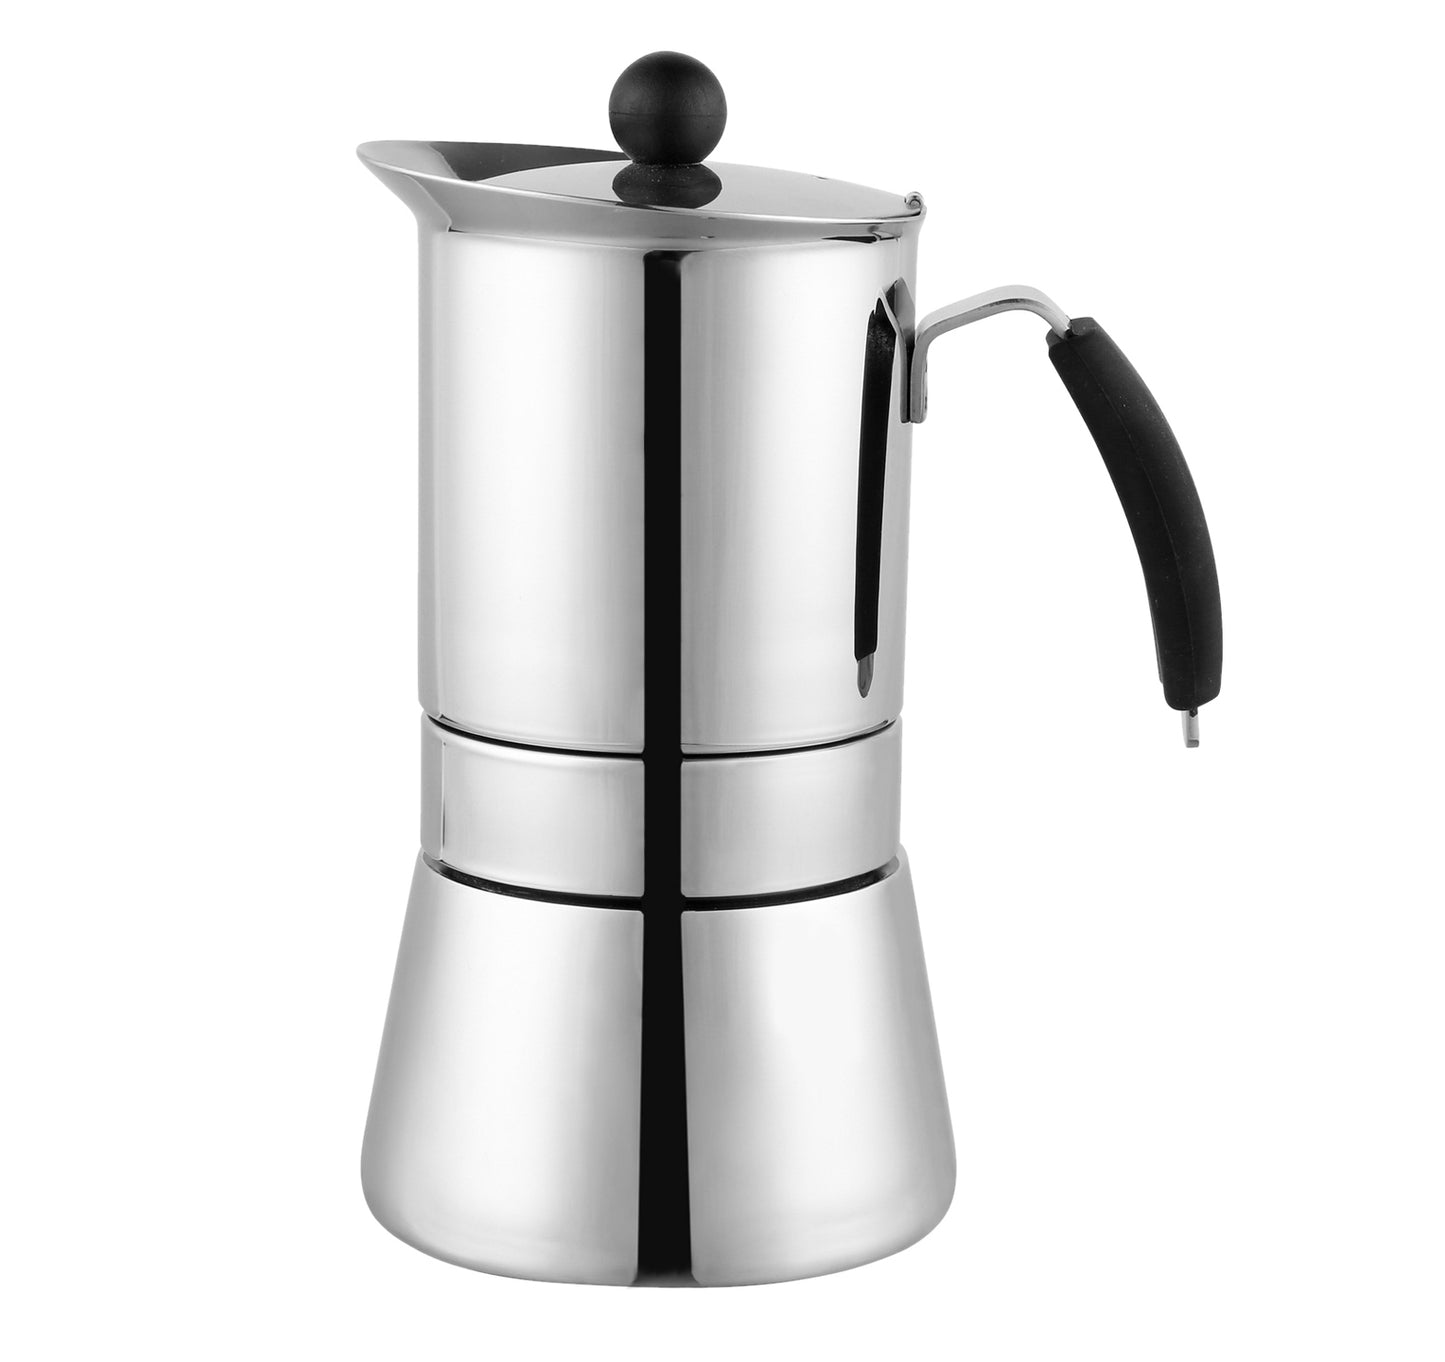 Cuisinox Amore Stainless Steel Induction Stovetop Moka Espresso Coffee Maker